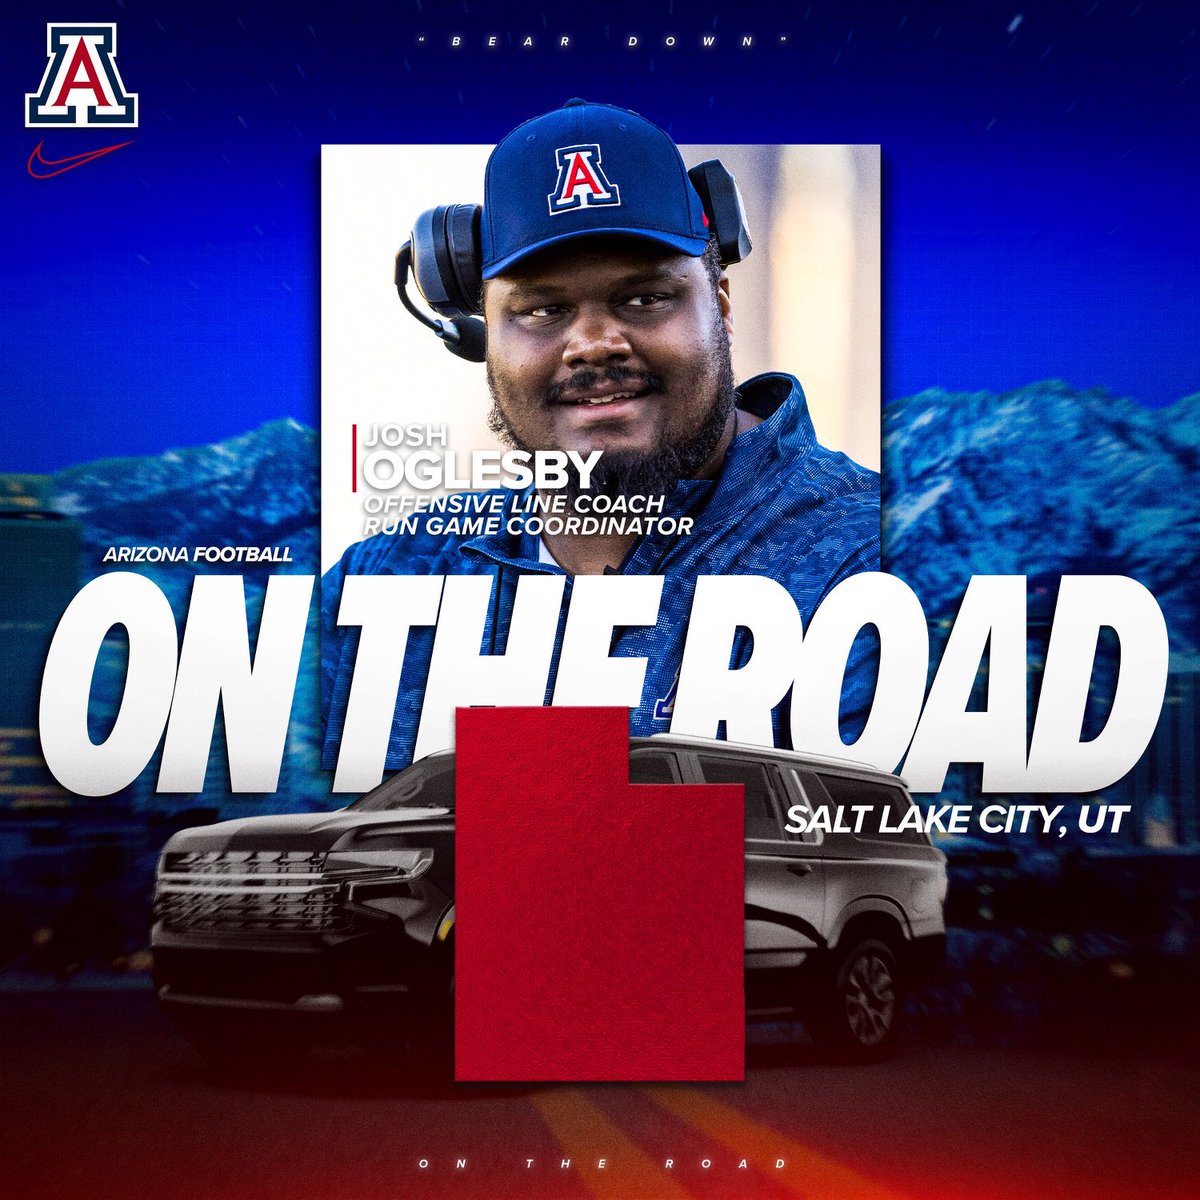 Out looking for future Wildcats with @Coach_Seumalo #BearDown